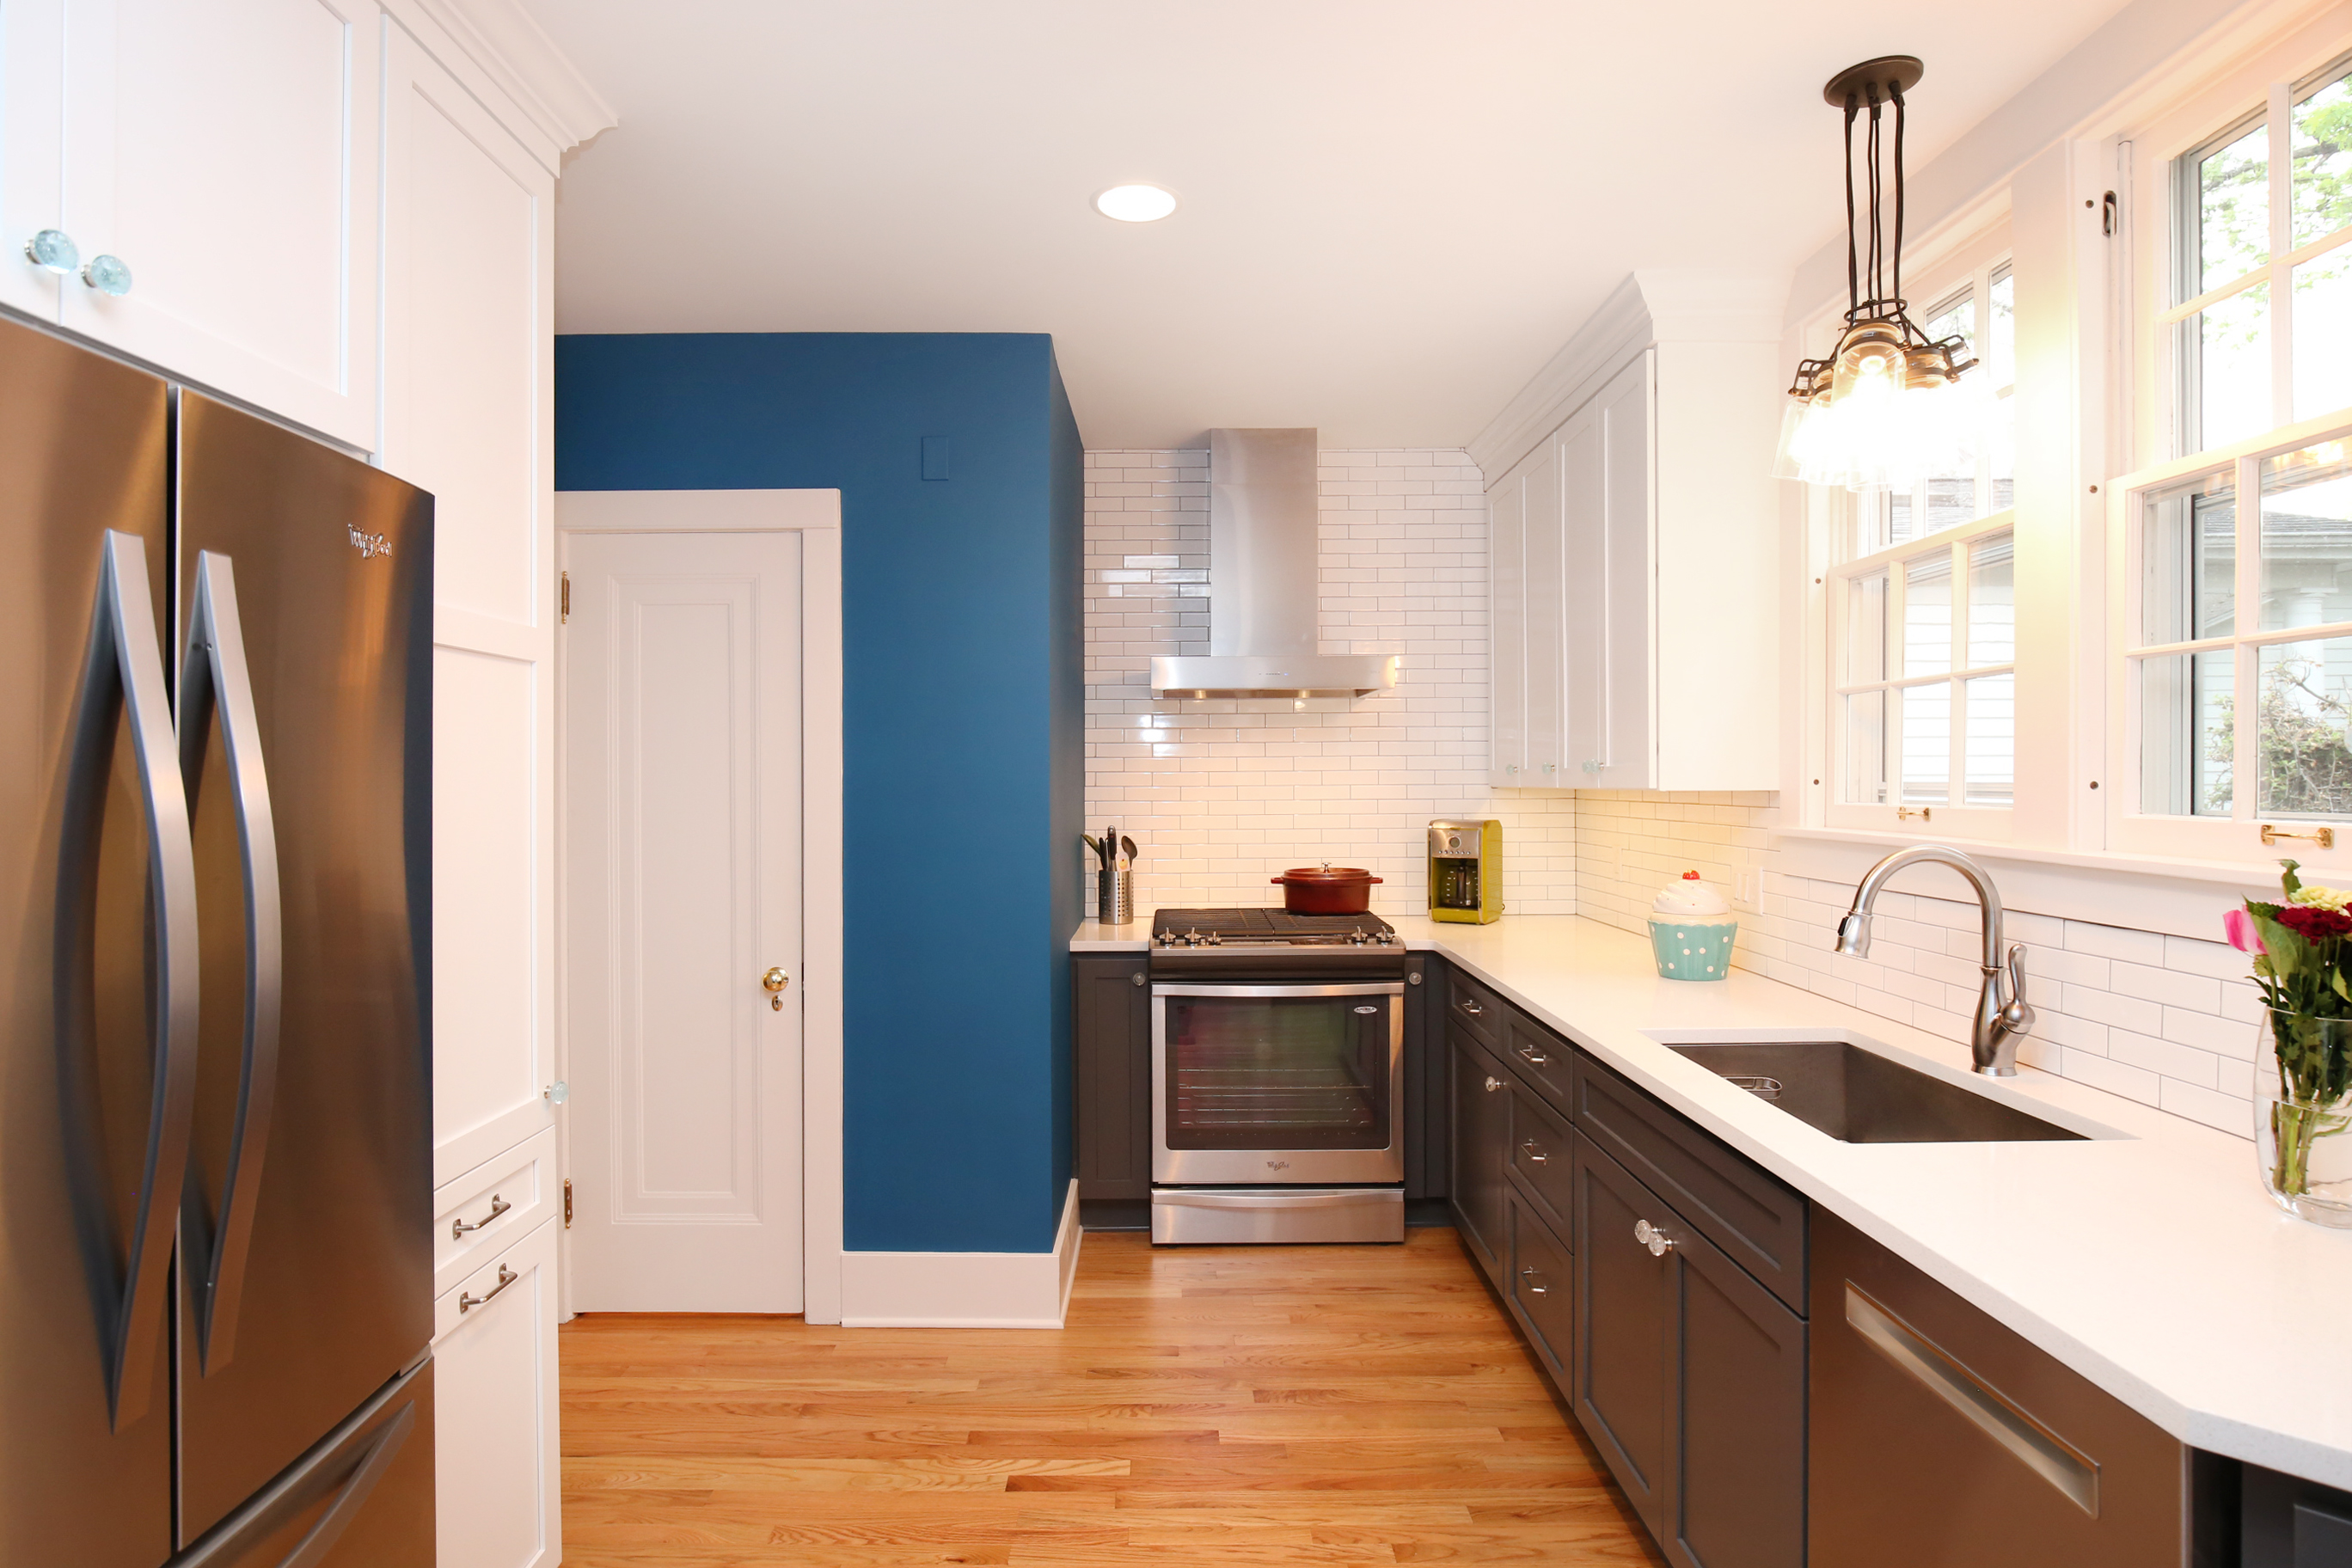 8 Design Tips to Maximize Space in a Small Kitchen